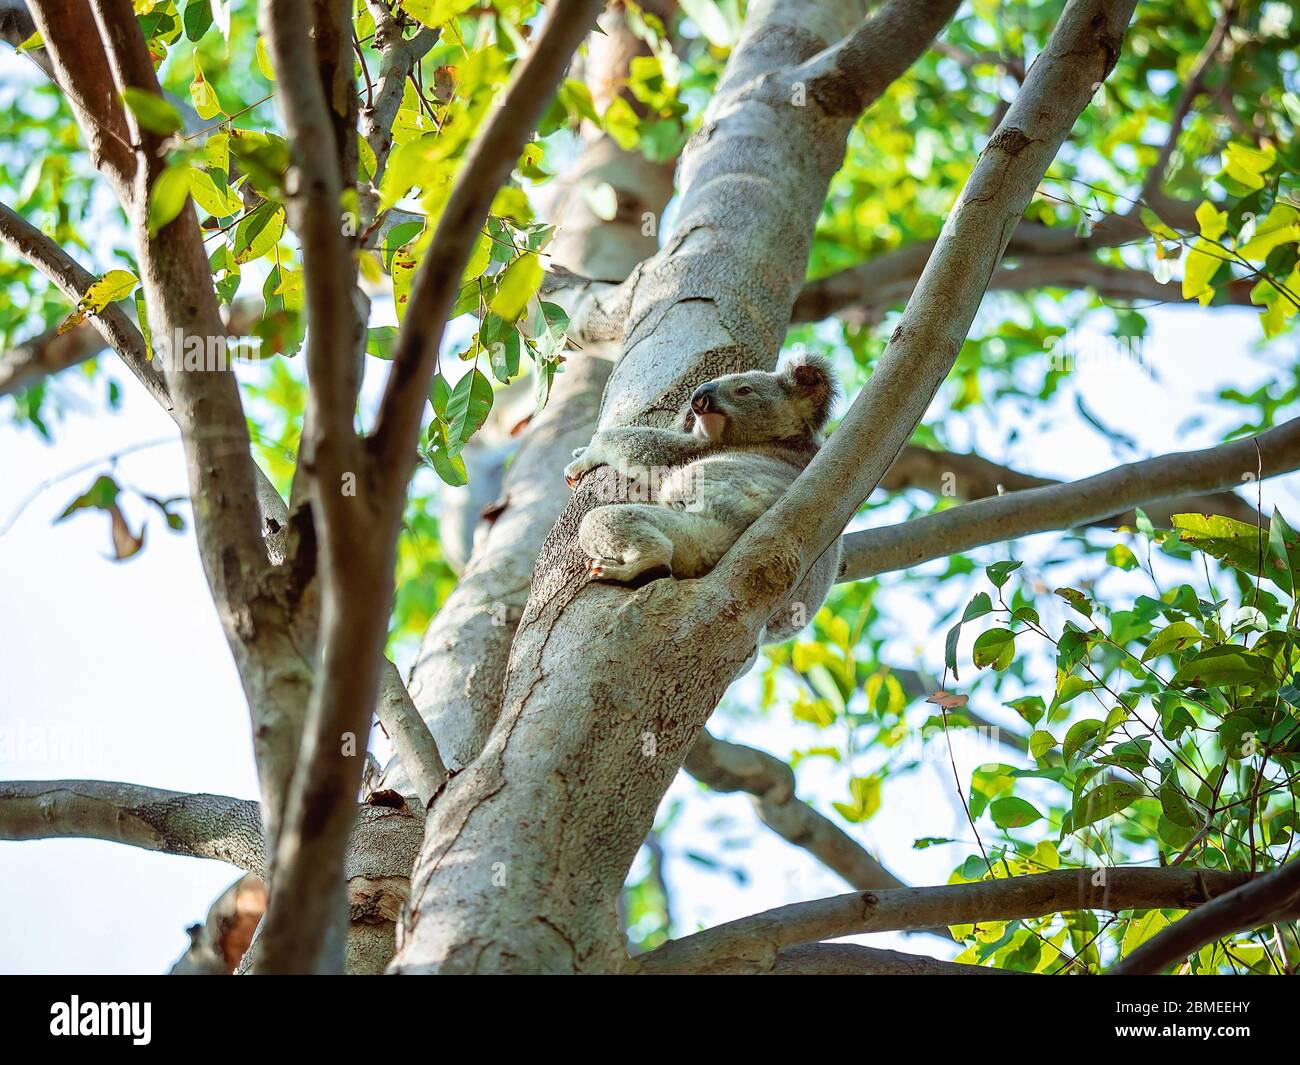 An Australian koala sitting on the branch of a tree in his native environment, the eucalyptus forest Stock Photo